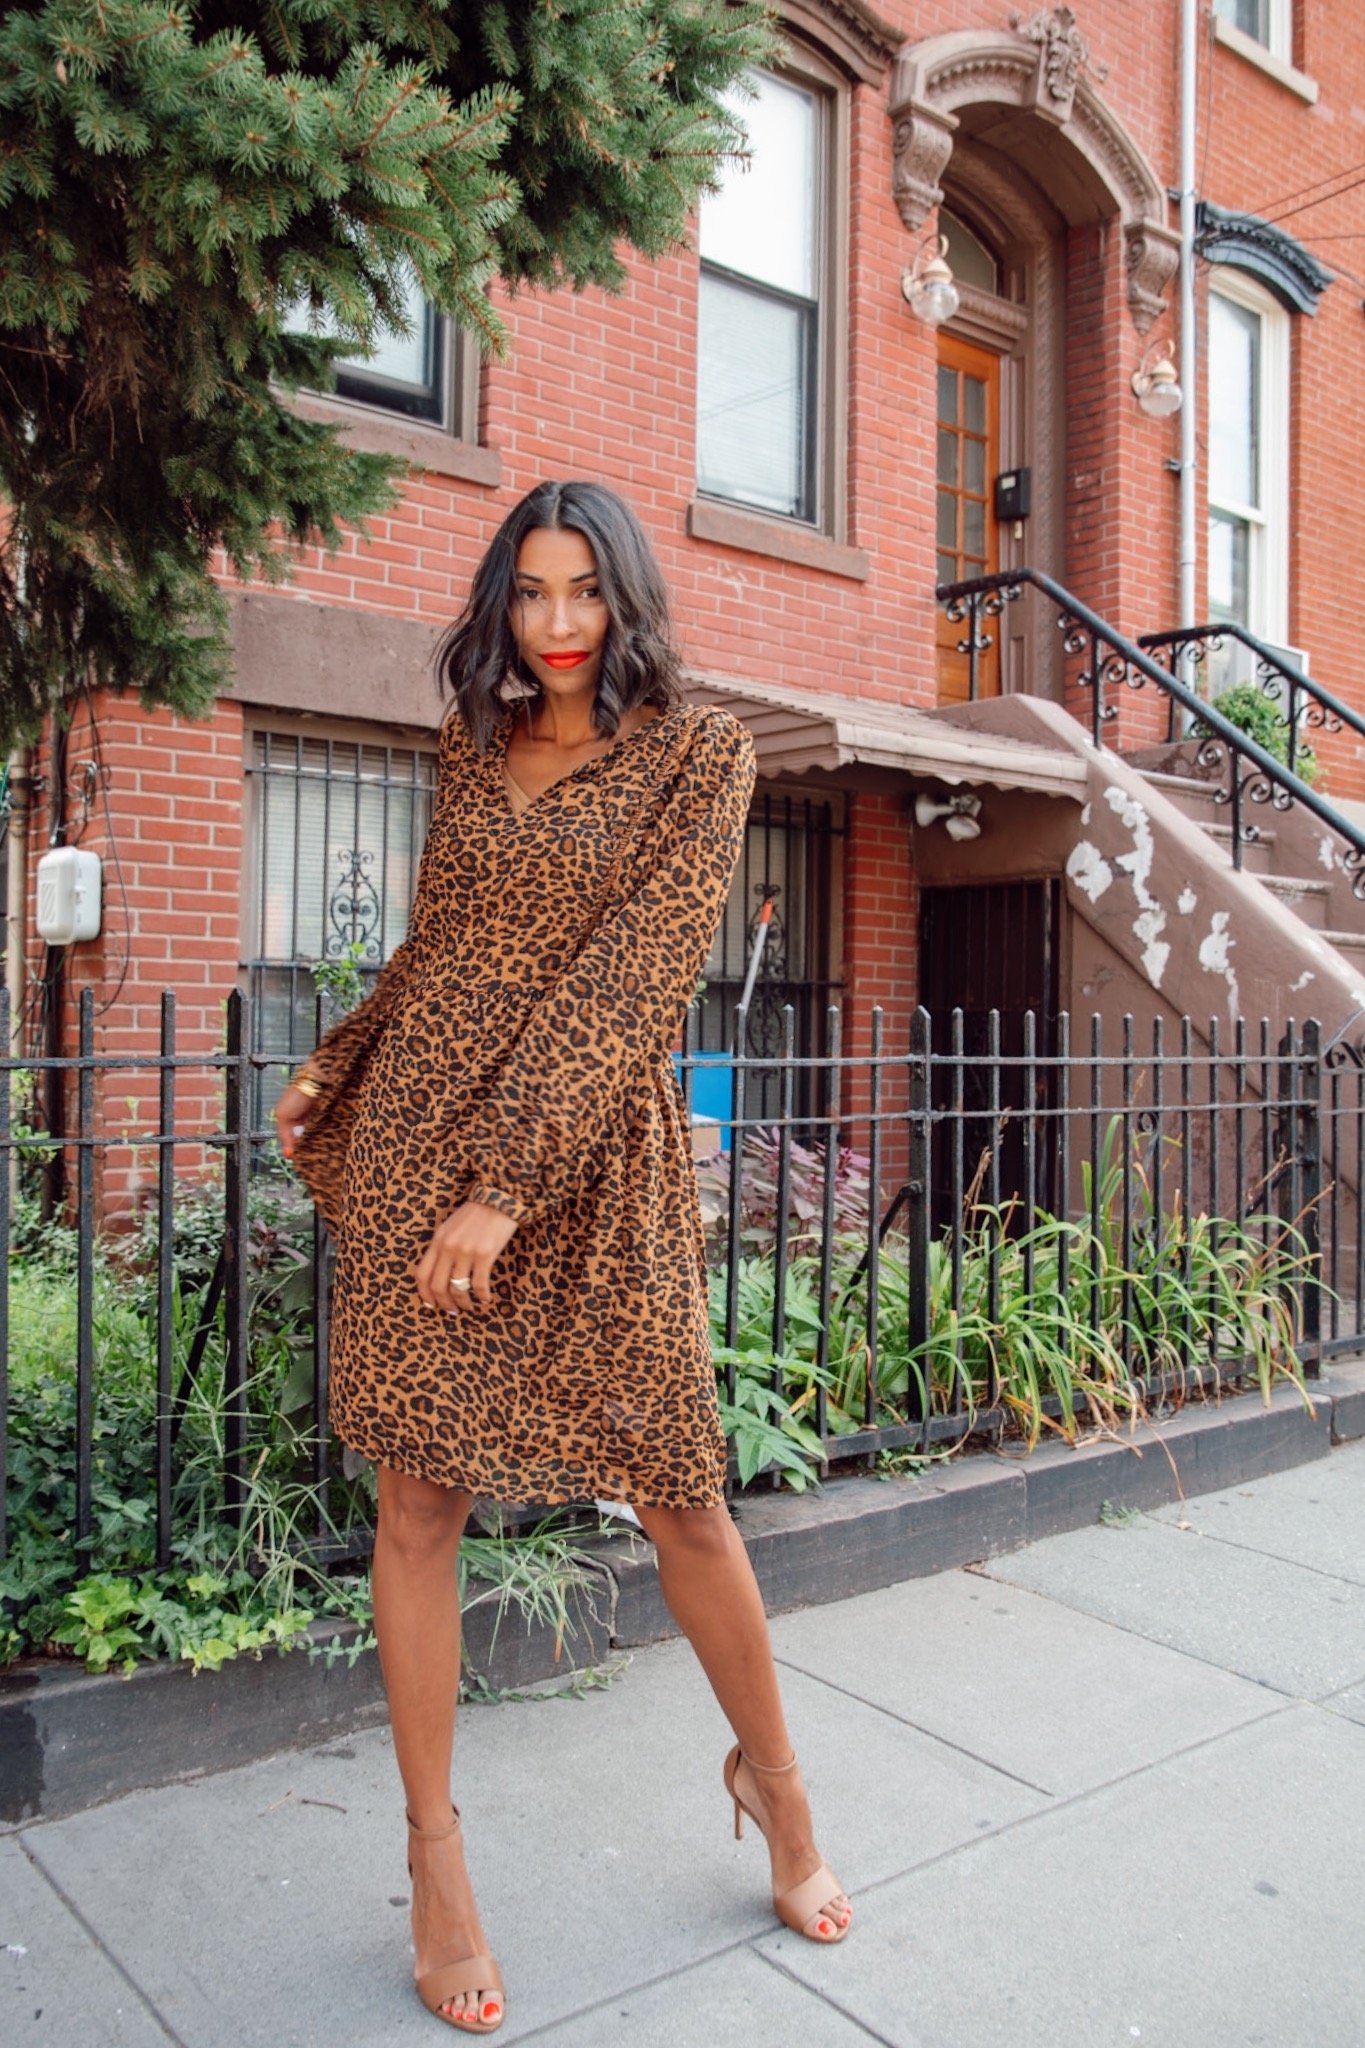 Chic Animal Print Pieces For The Fall All Under 30 Bucks Now! - Love ...